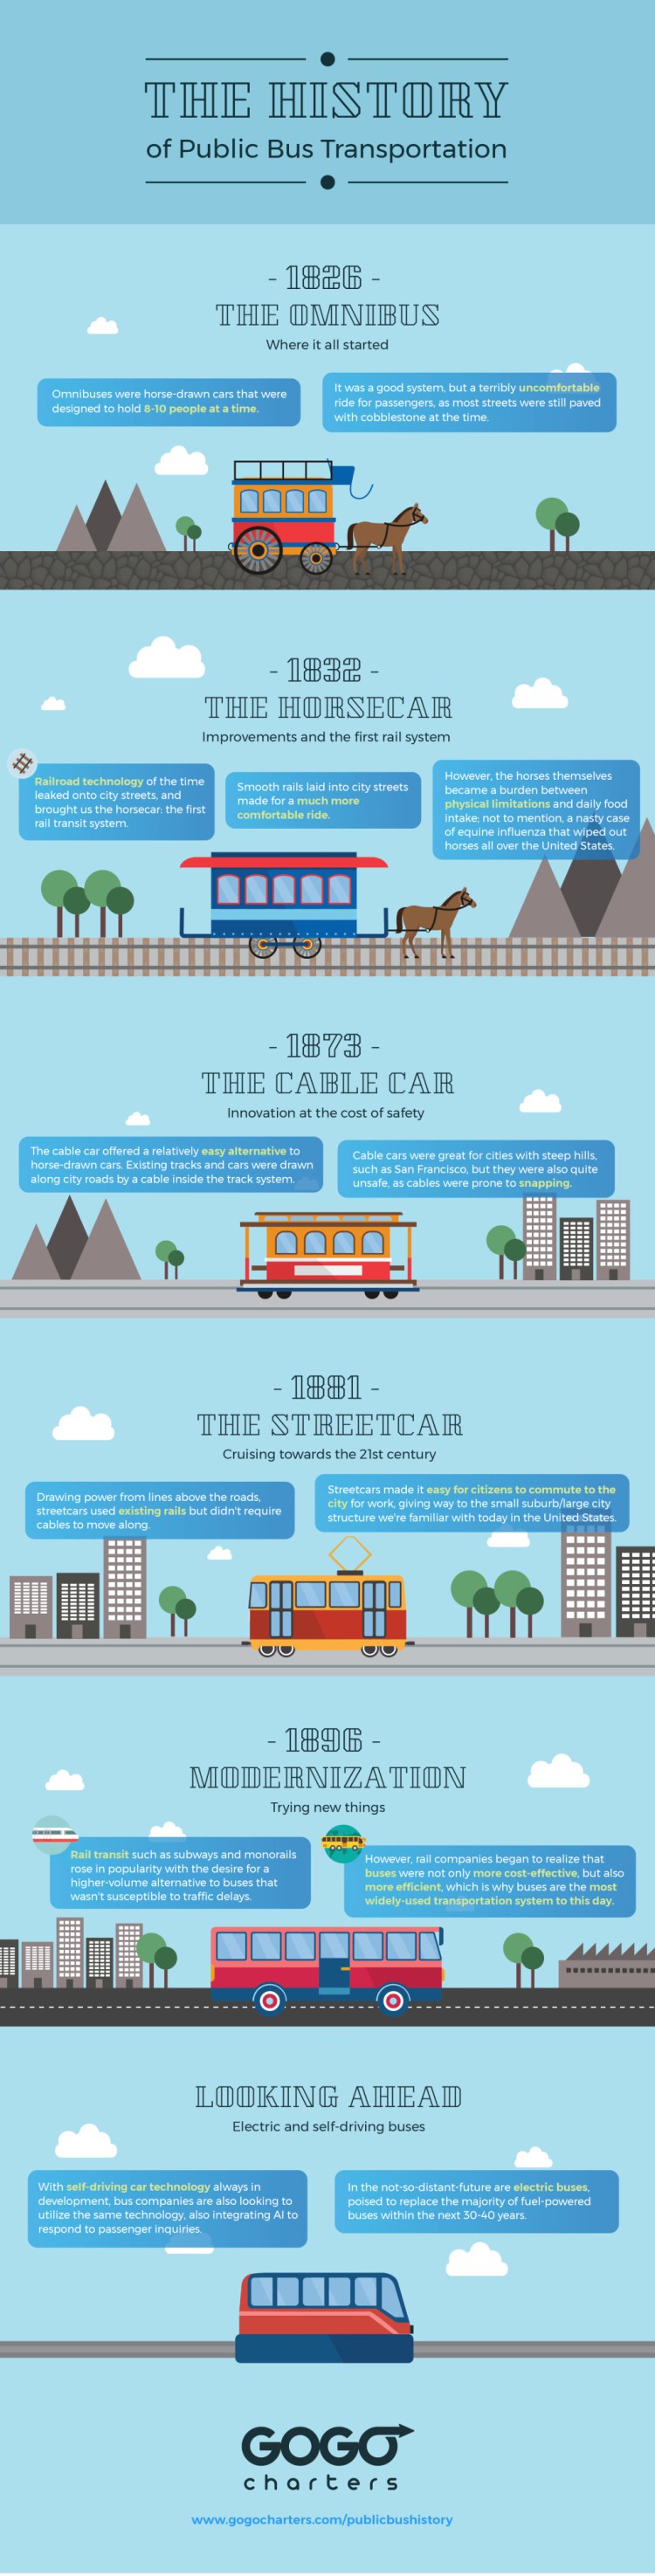 GOGO Charters - the history of public transportation infographic